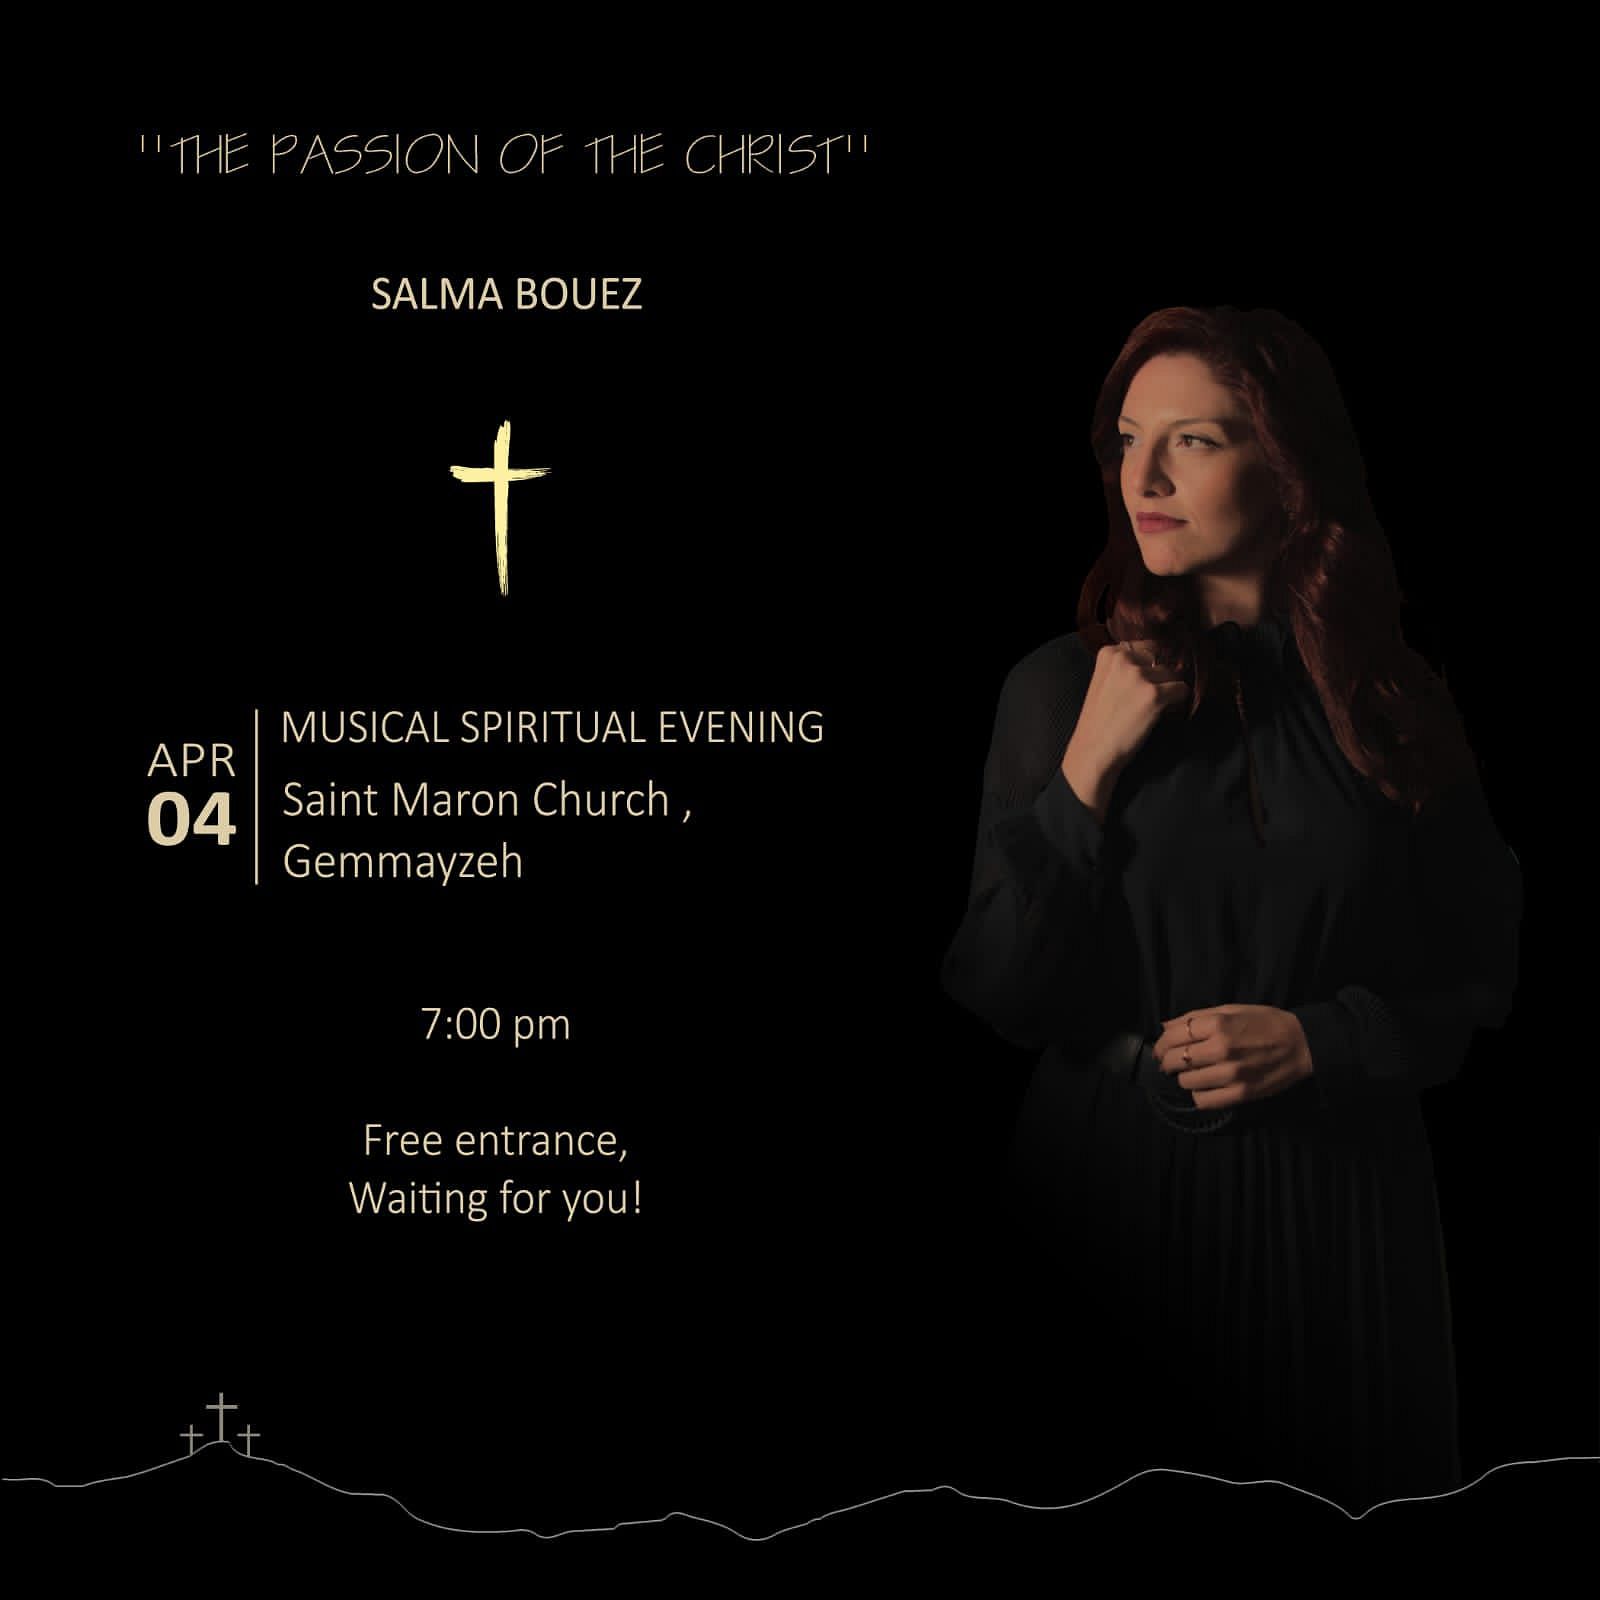 THE PASSION OF THE CHRIST, SALMA BOUEZ thumbnail